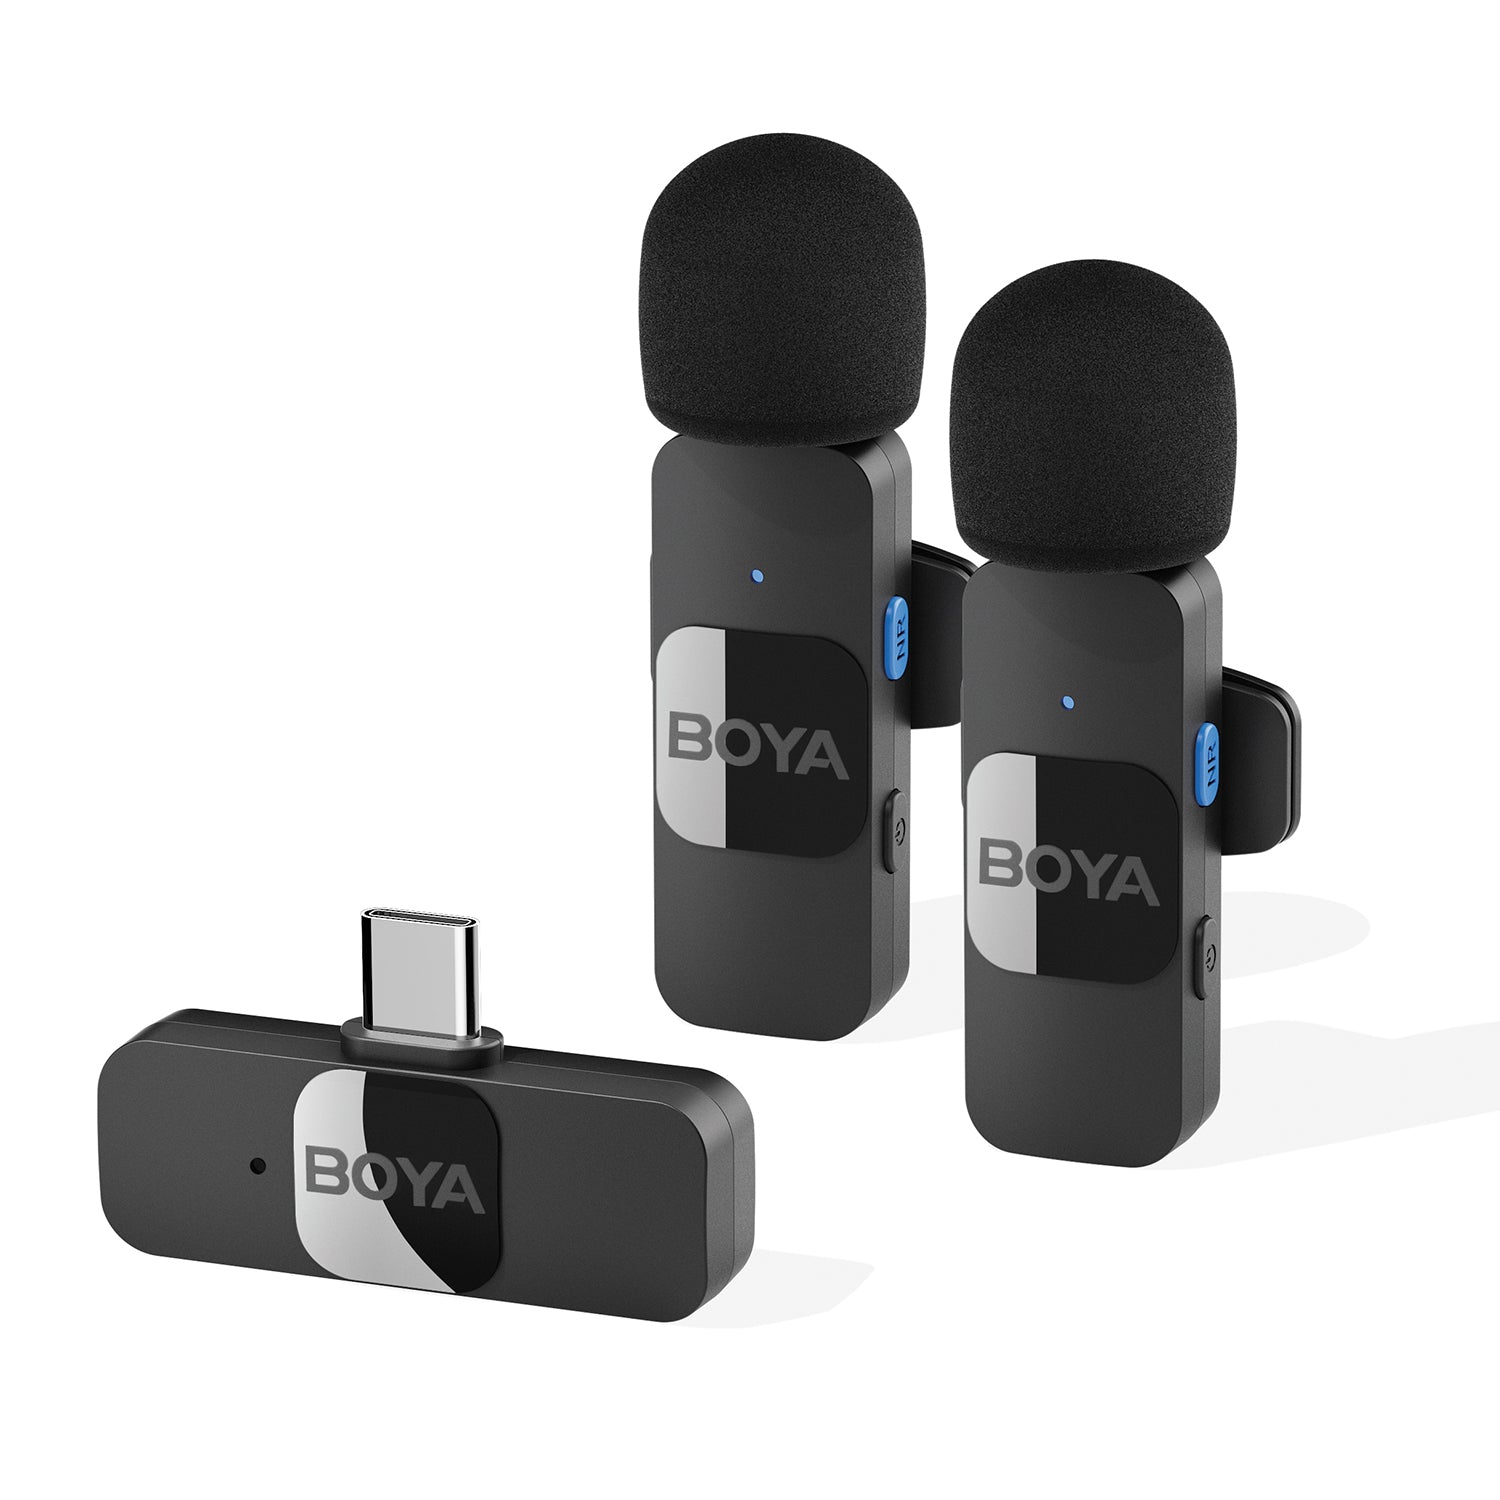 BOYA BY-V20 Dual Wireless Lavalier Microphone for Android